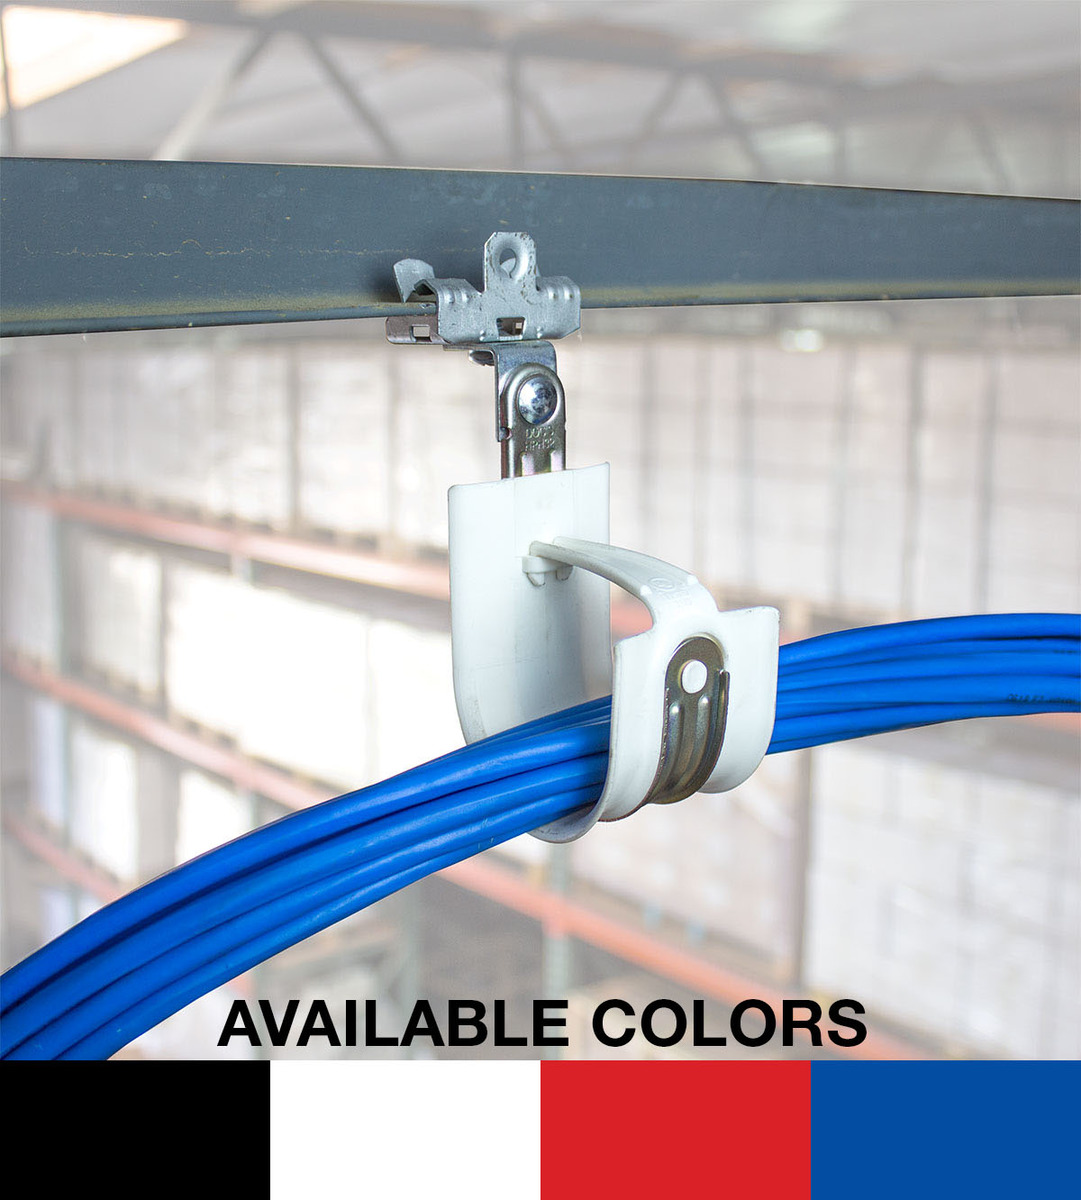 J Hooks  For Cable Management - Infinity Cable Products